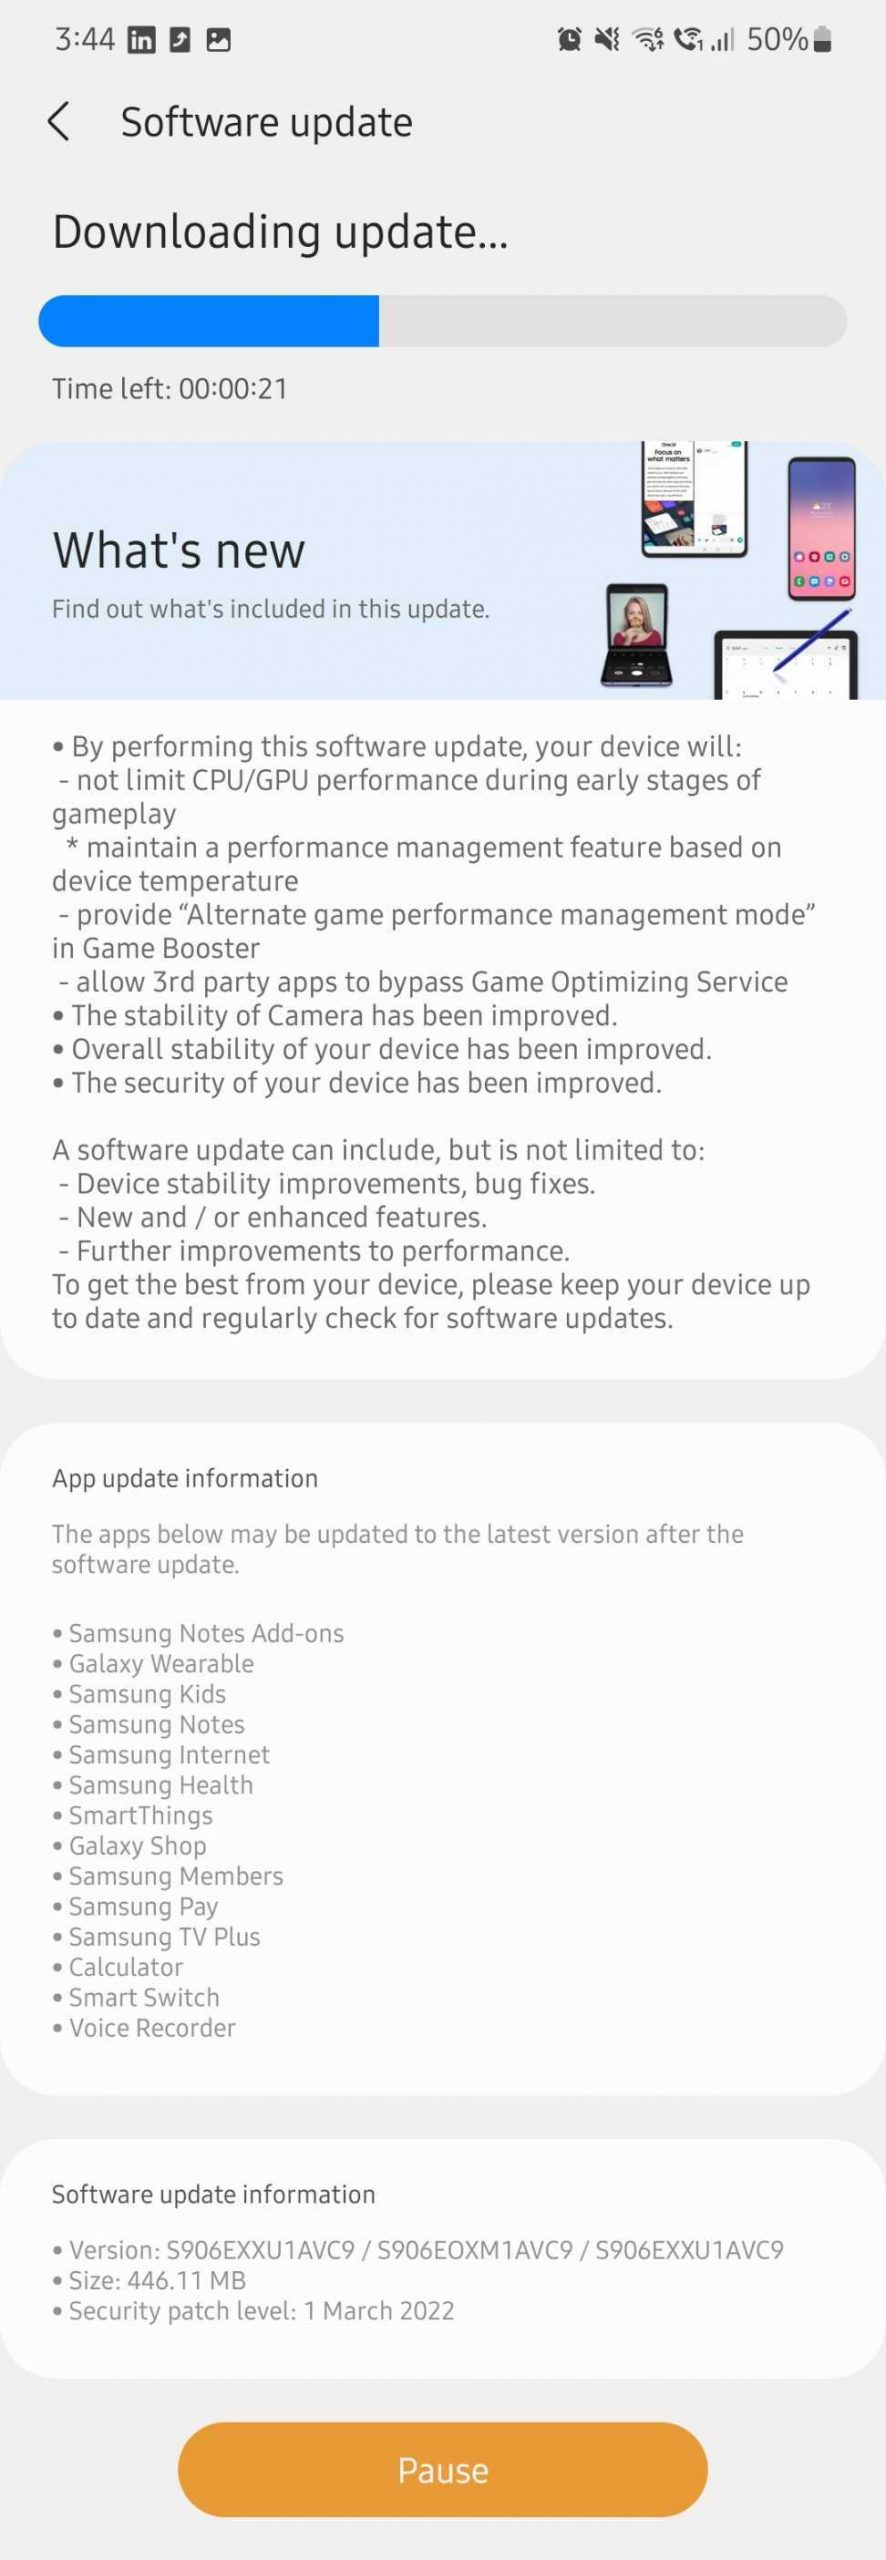 samsung starts pushing update to fix throttling issue on the galaxy s22 series